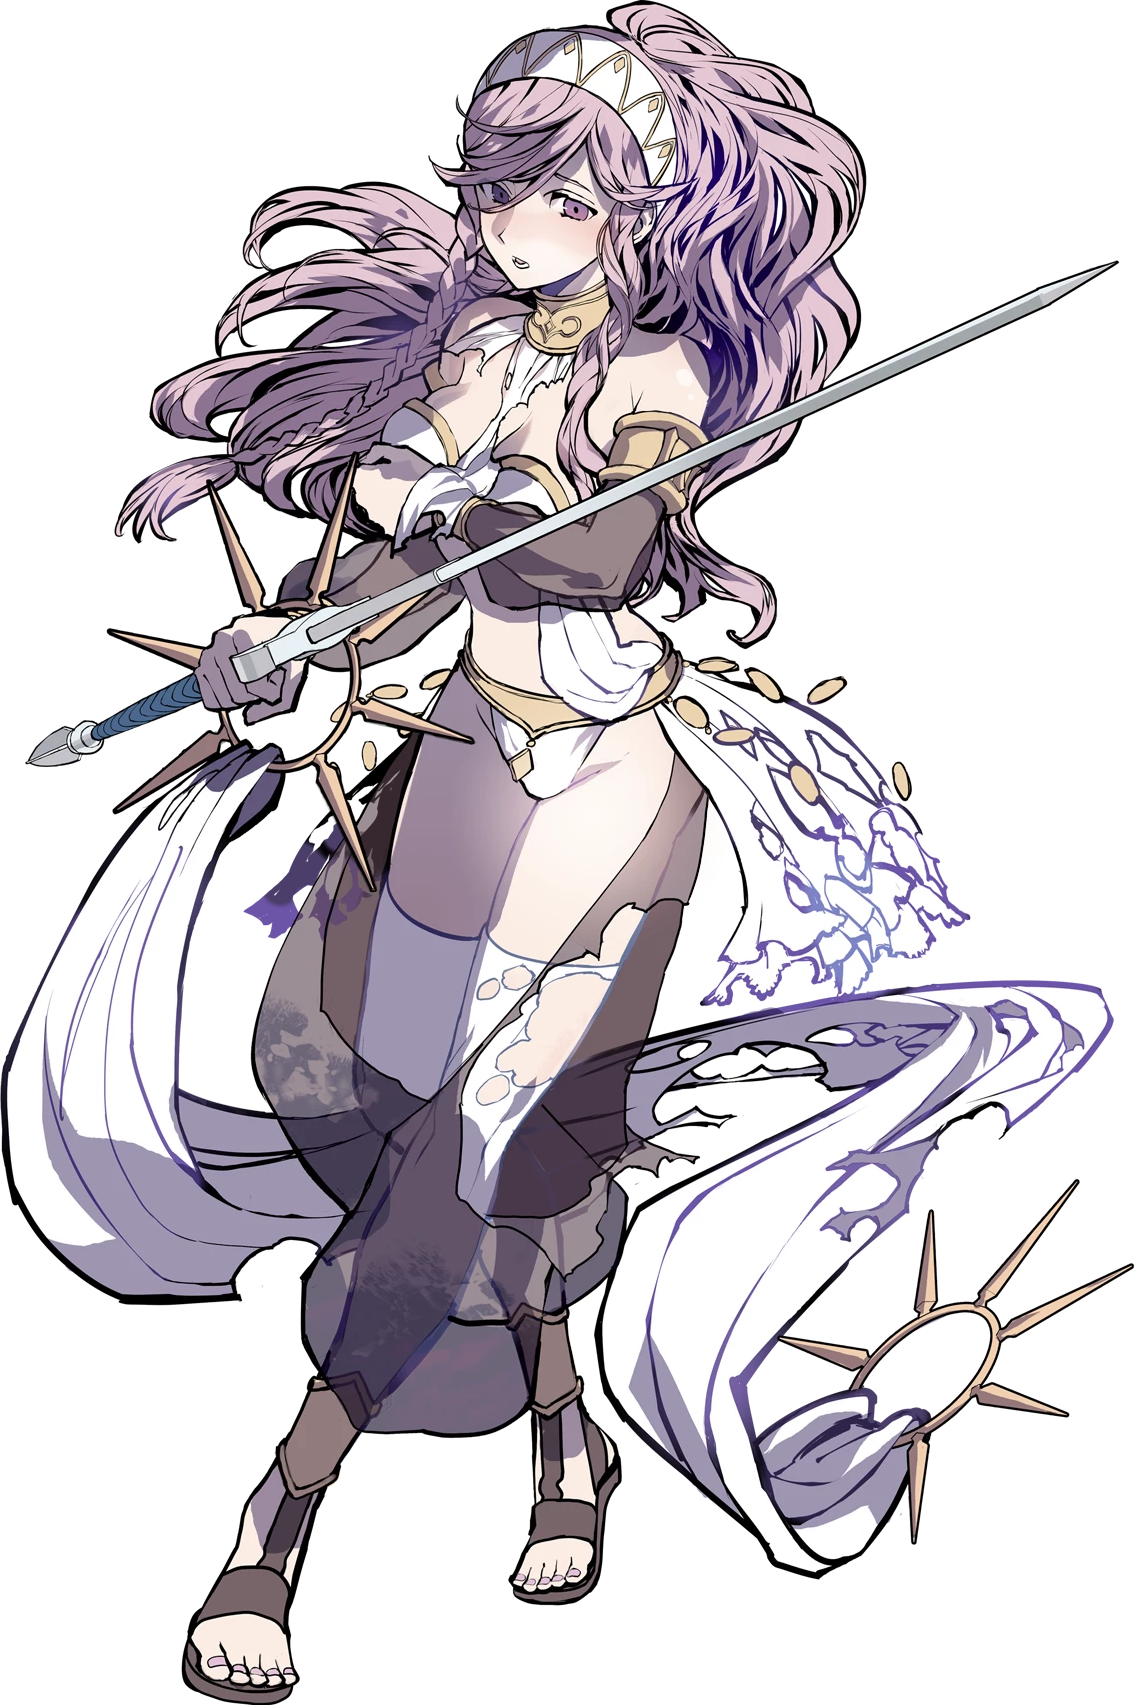 More Concerned About Keeping Her Modesty Than Her Life - Fire Emblem Heroes Olivia (1134x1705)